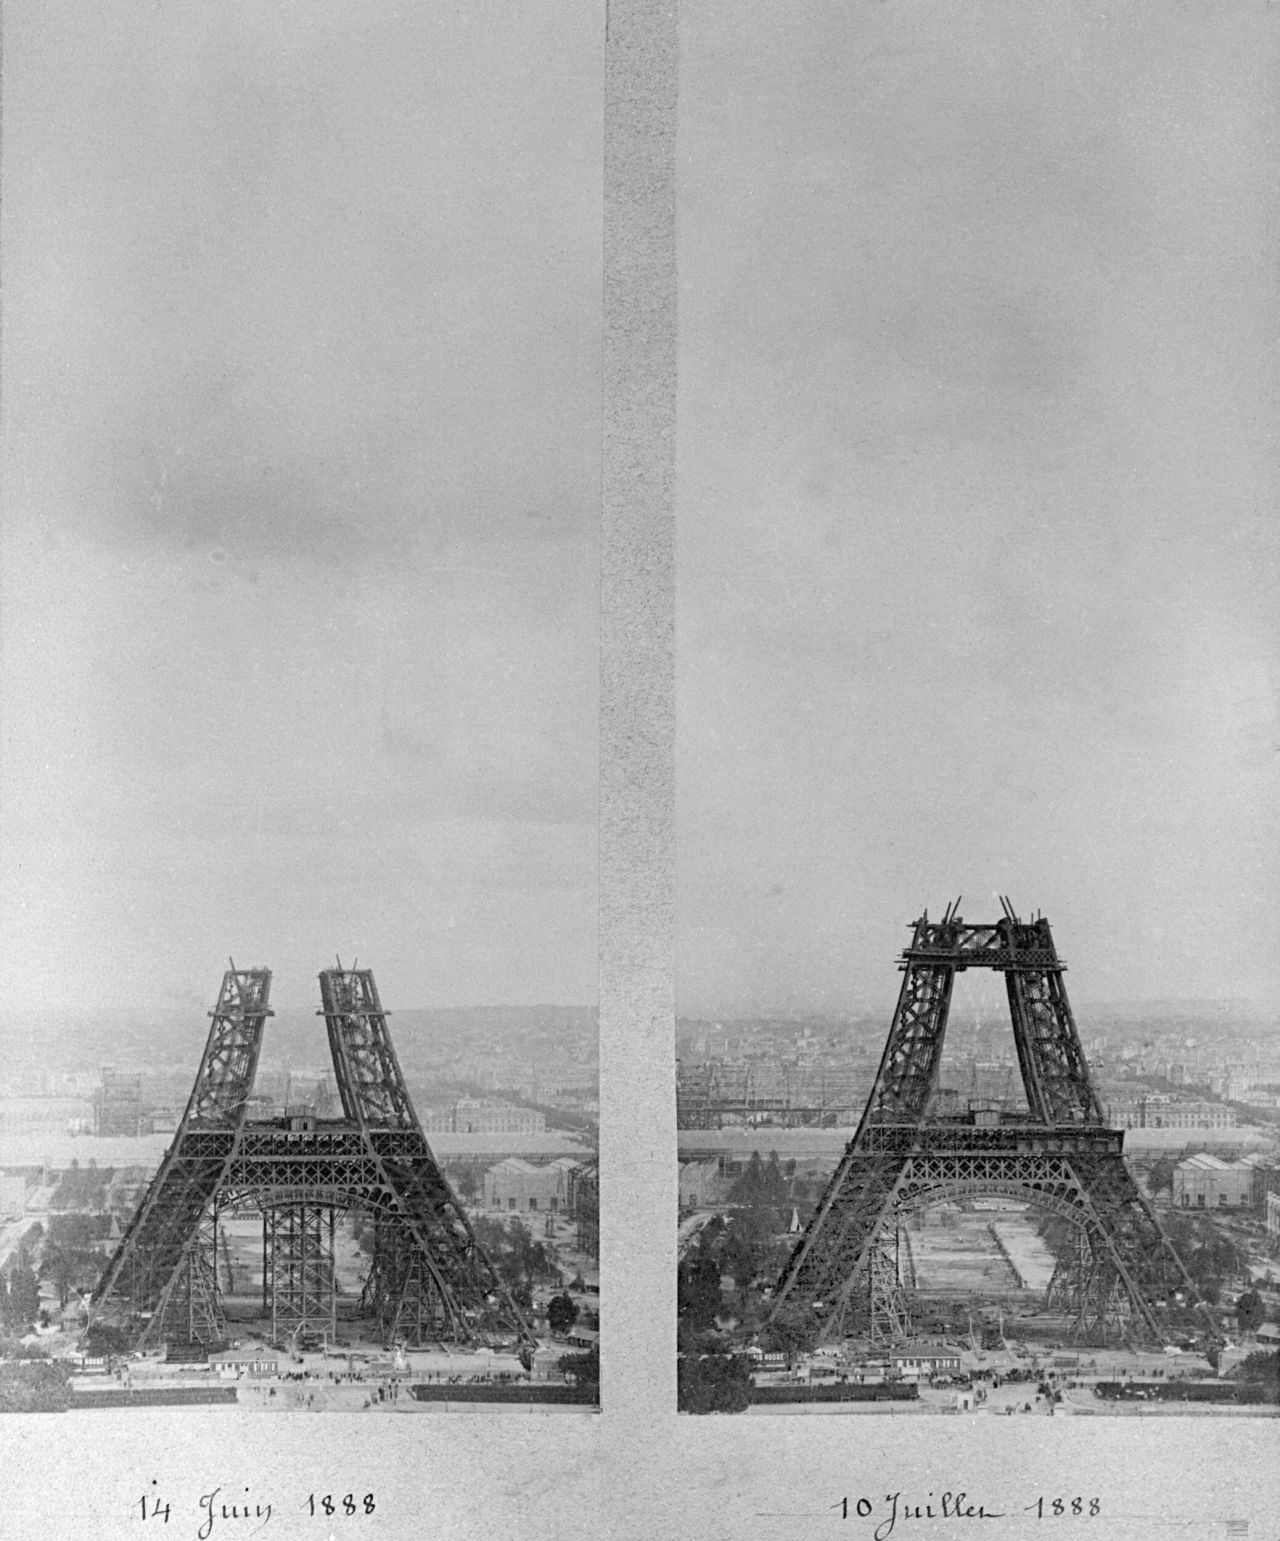 Construction works for France's most famous building in July 1887. Built for the 1889 World Fair, the tower was only intended to last 20 years. It was saved by its indispensable use as a radio and telecommunications transmitter.